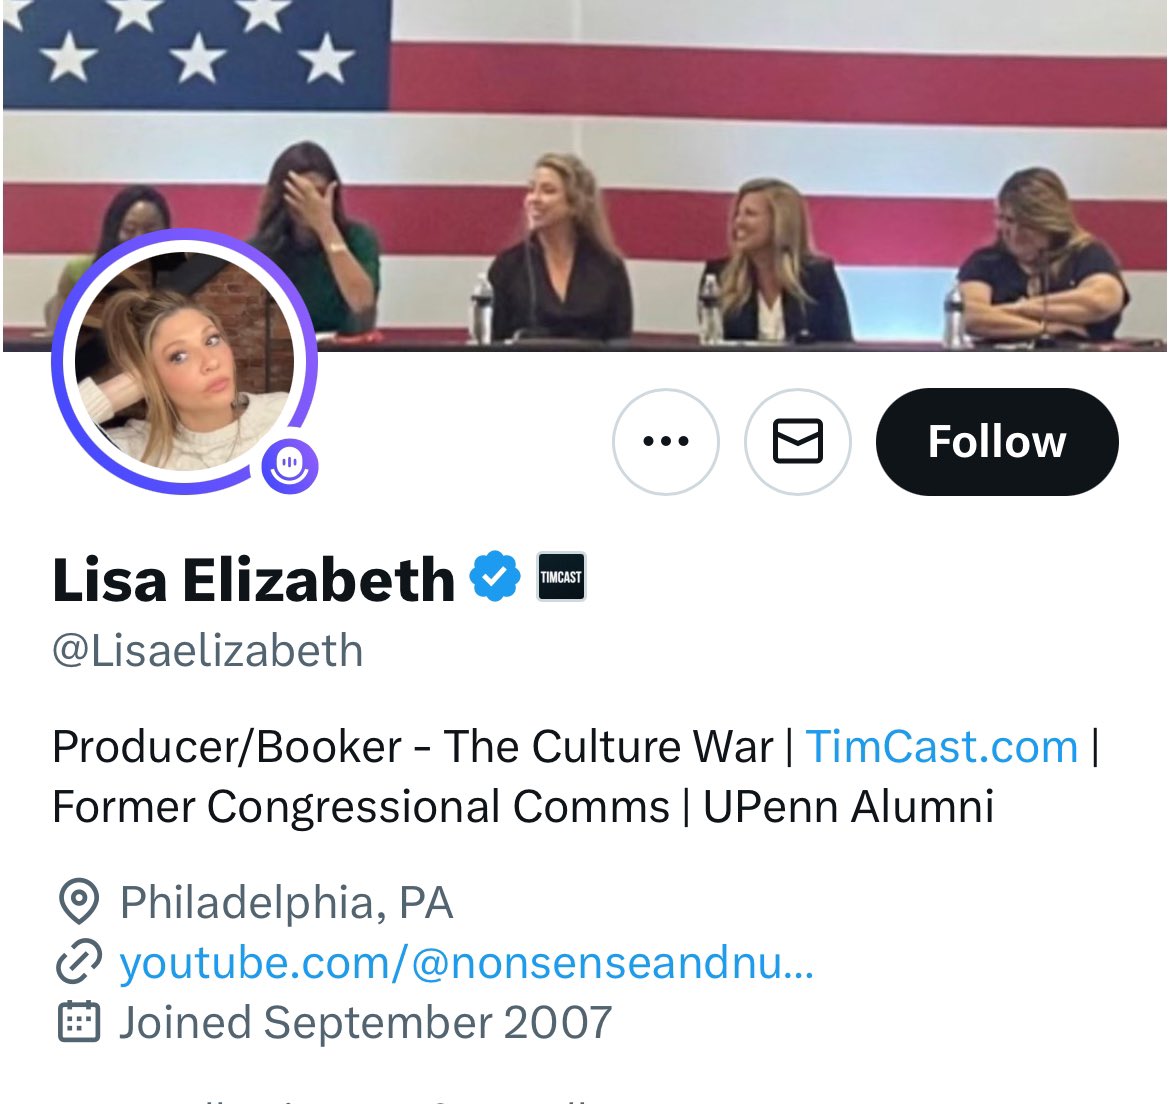 Lisa Elizabeth, who works for Tim Pool, just said in a Space that Republicans have higher IQs than Democrats. These folks are hilarious. 🤣🤣🤣🤣